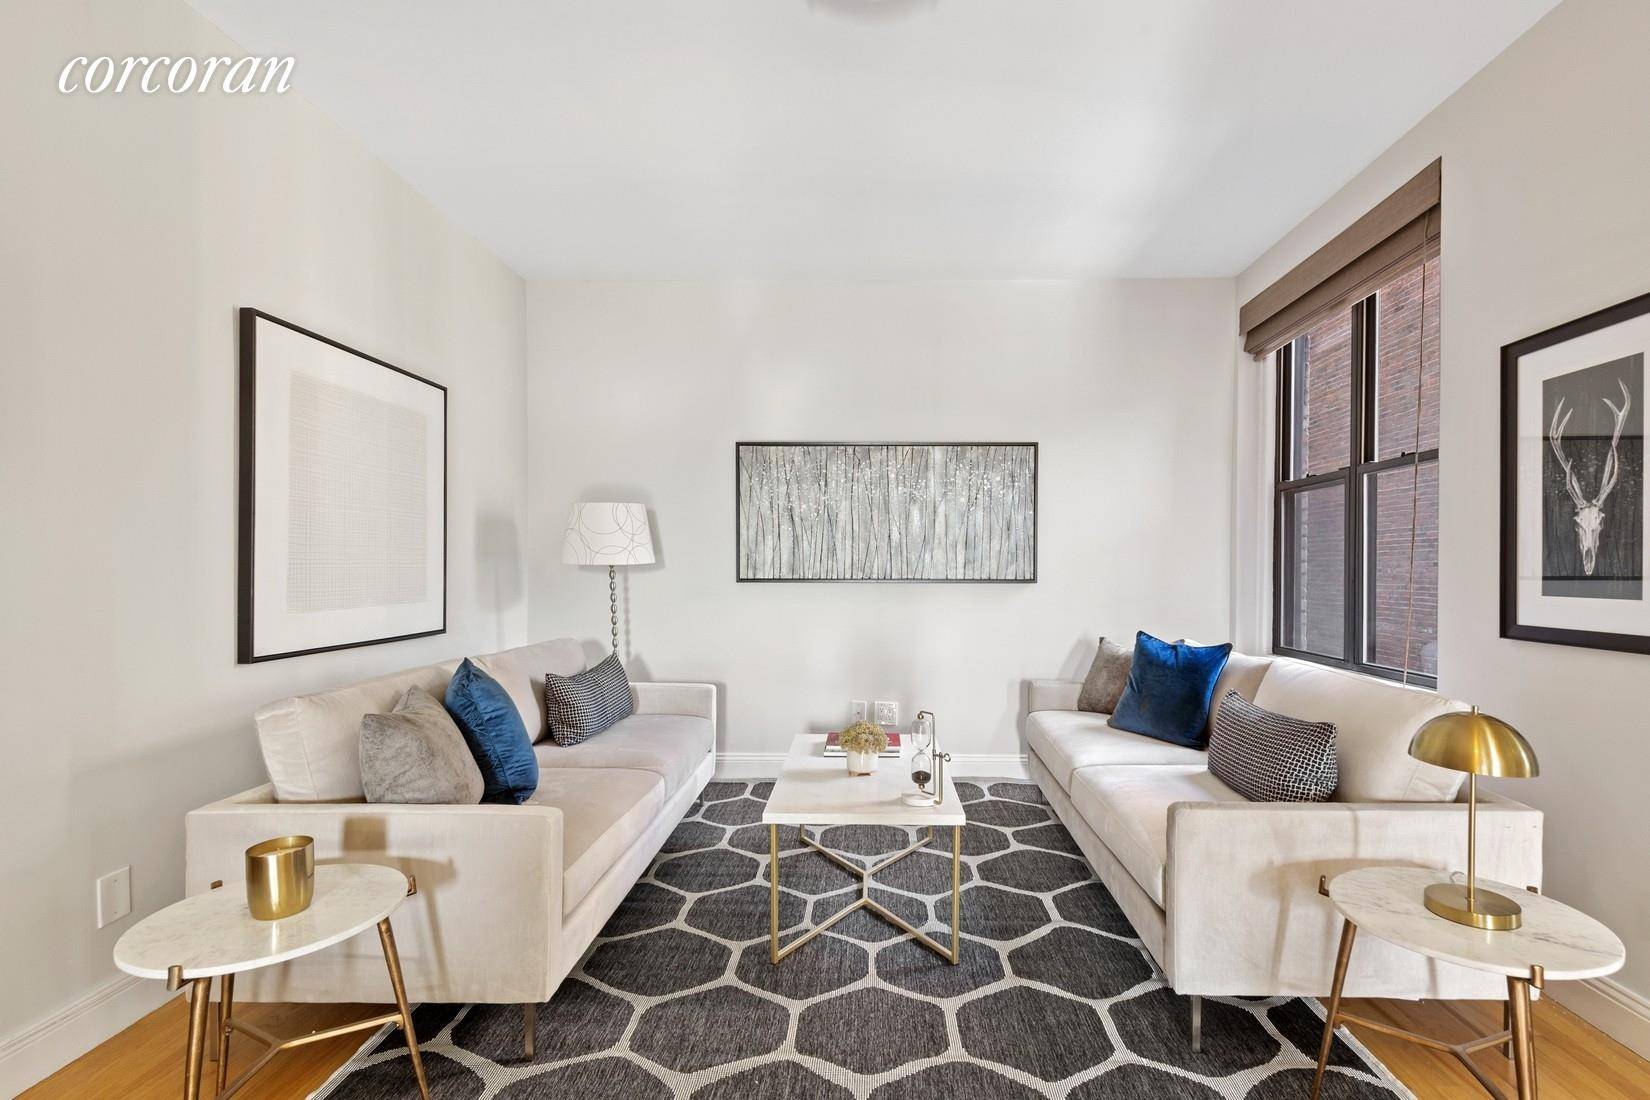 Overlooking the quintessential brownstones of Joralemon Street and the lovely gardens below, this recently renovated two bedroom home is bright, quiet and serene, without an ounce of wasted space.